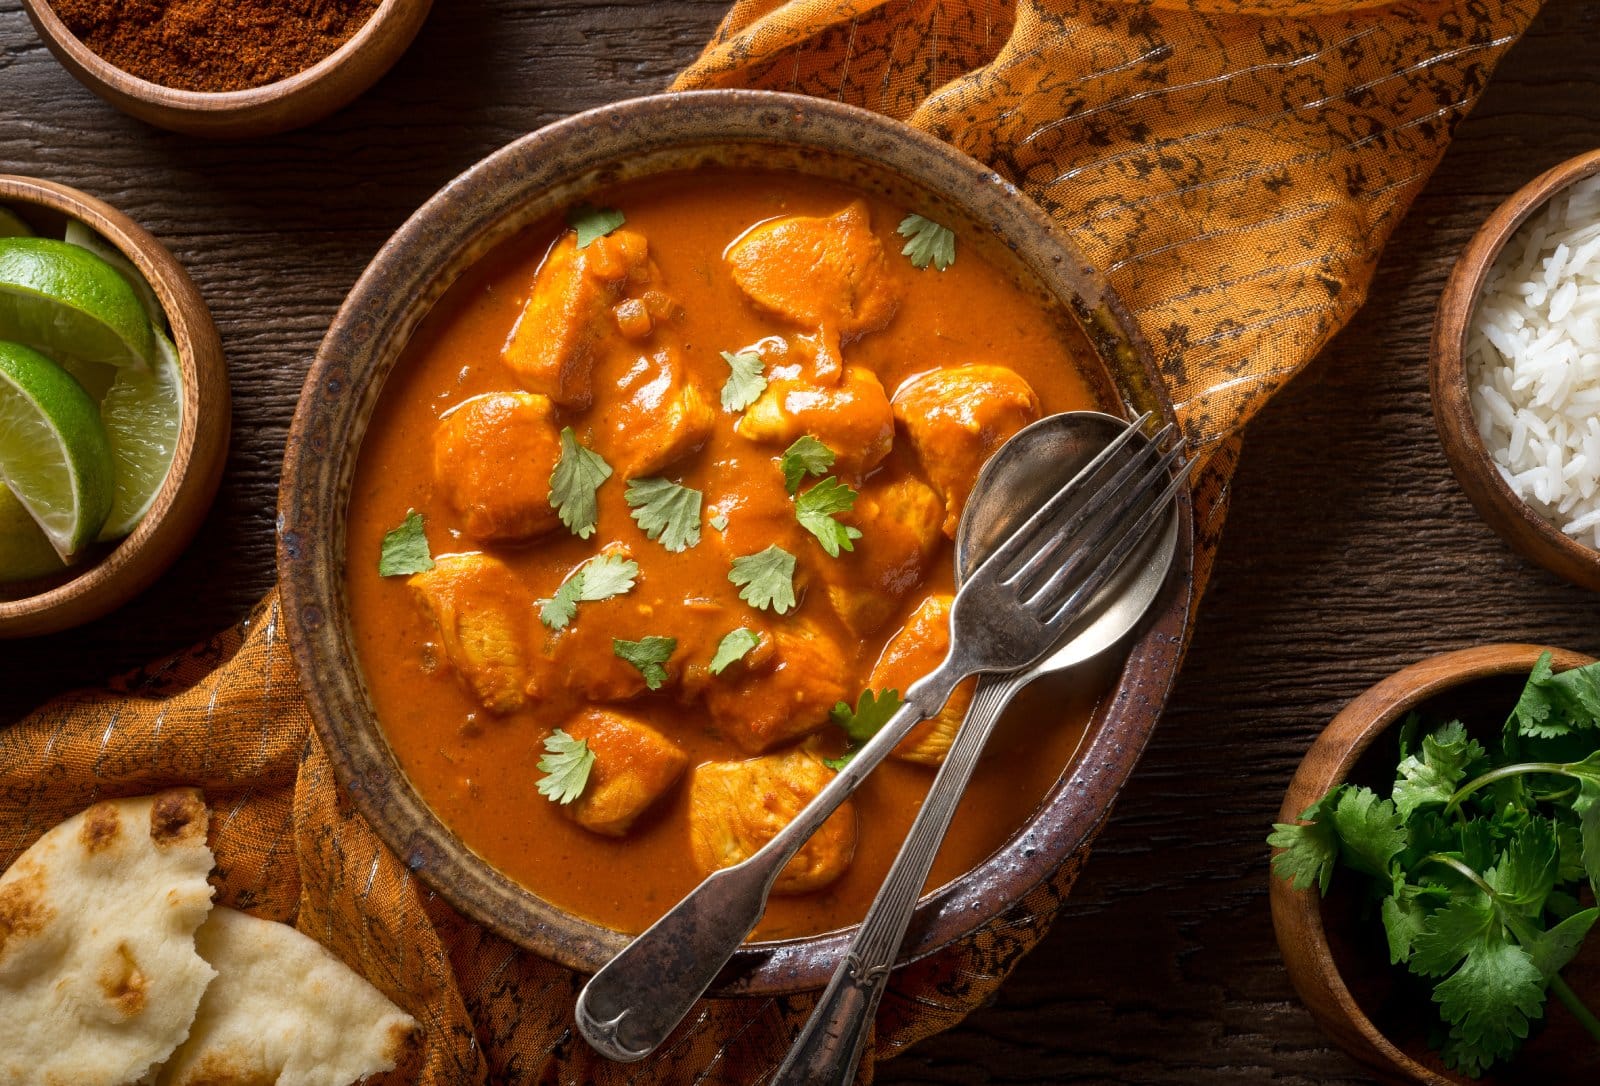 Image Credit: Shutterstock / Foodio <p><span>A dish with contested origins but universal appeal, this creamy, tomato-based curry is a favorite in Indian and British cuisines alike.</span></p>